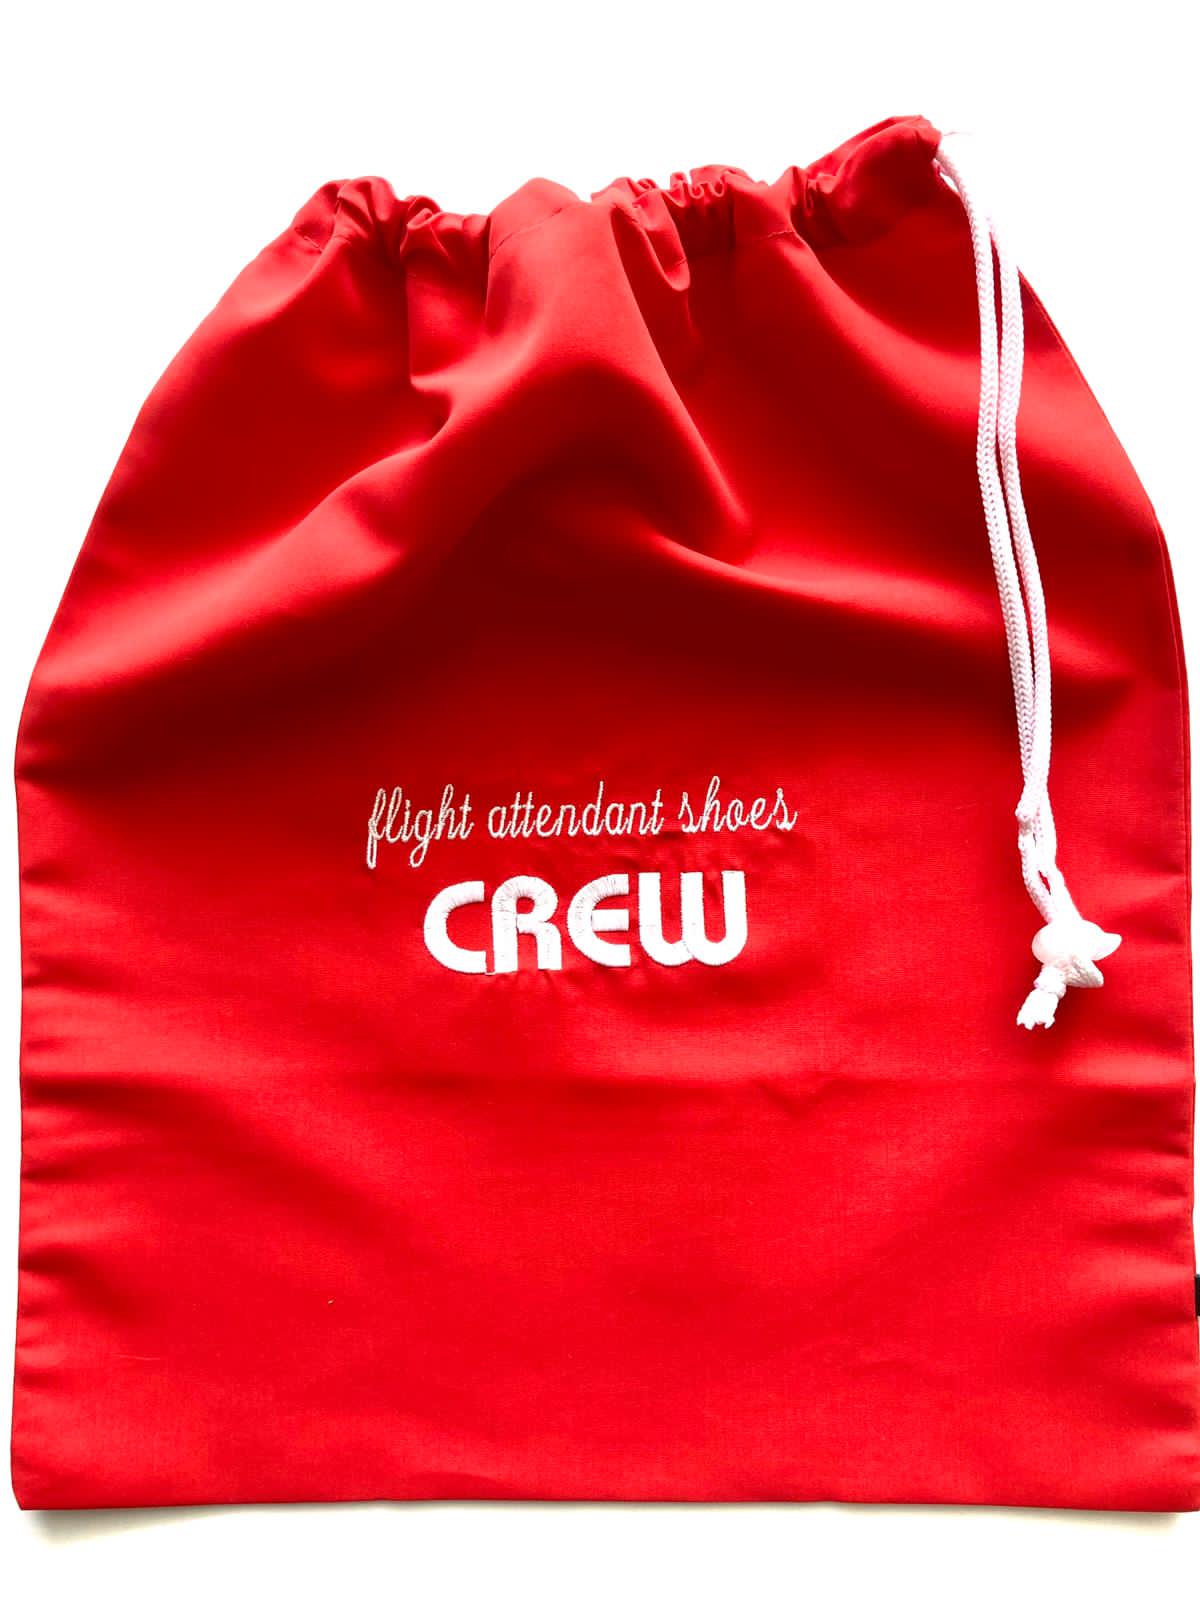 Flight attendant shoes CREW red and white bag